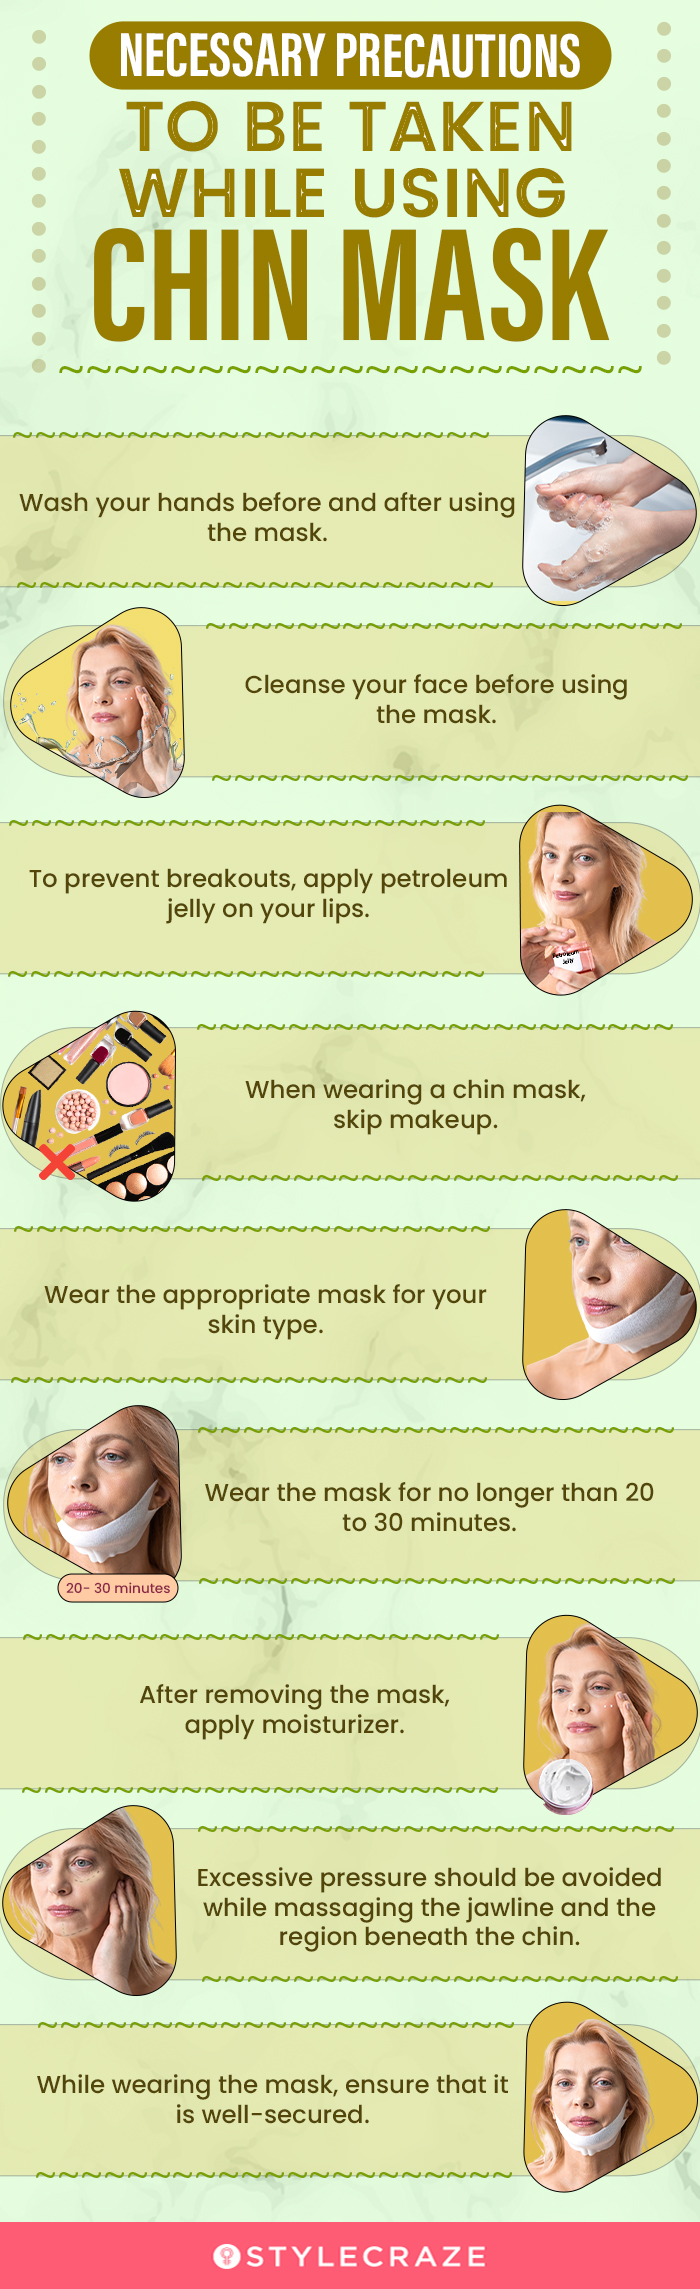 Necessary Precautions To Be Taken While Using Chin Mask